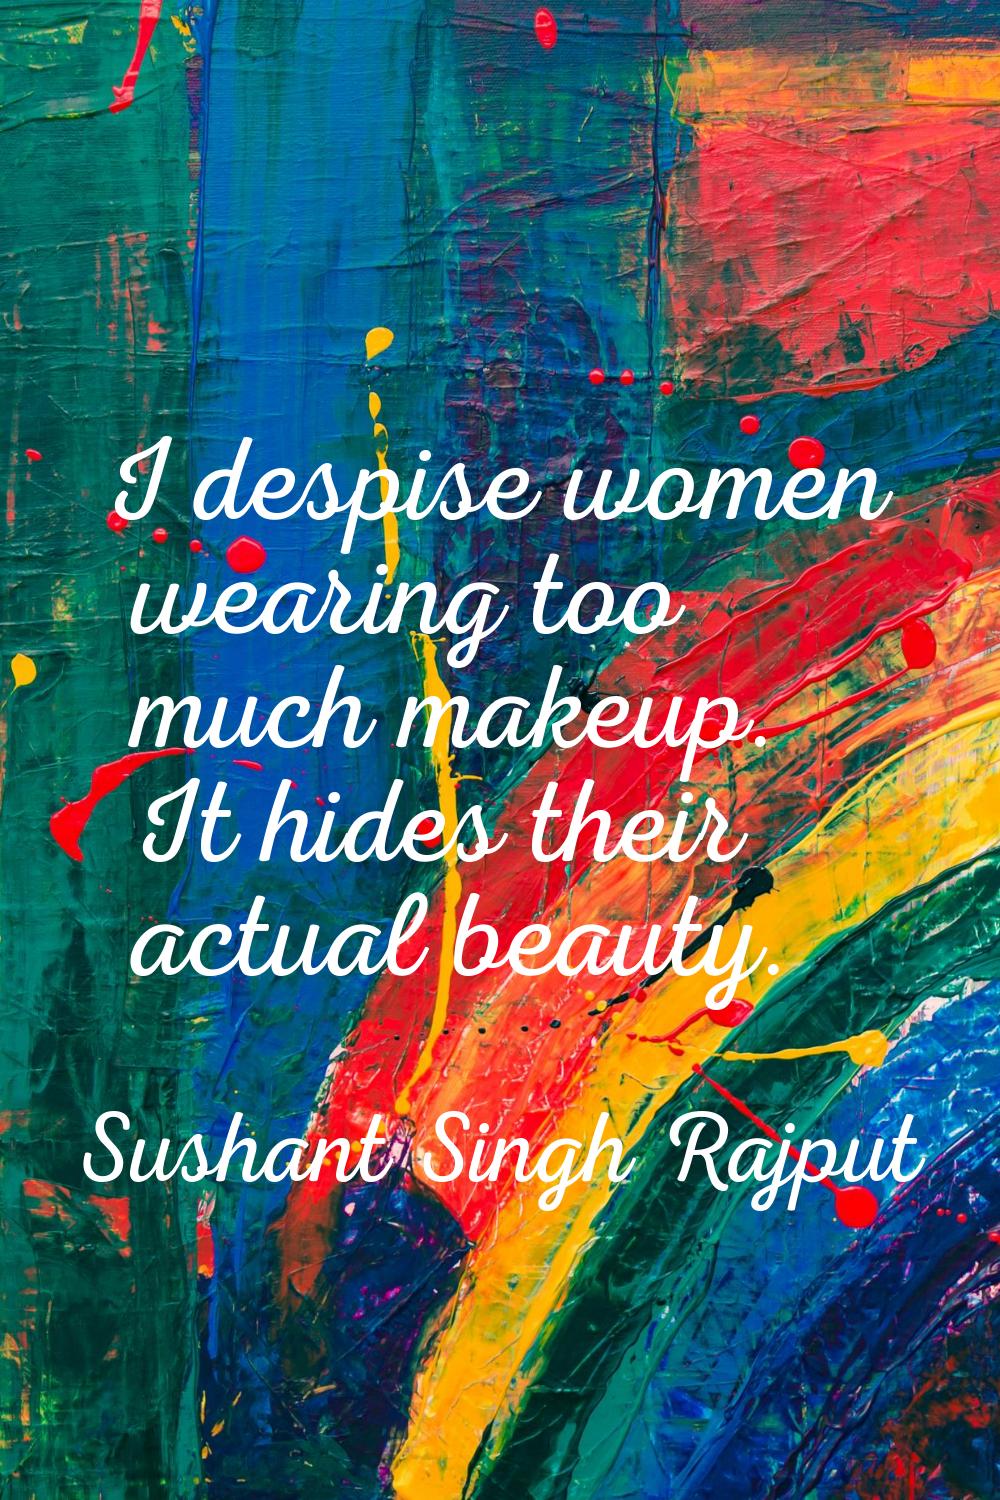 I despise women wearing too much makeup. It hides their actual beauty.